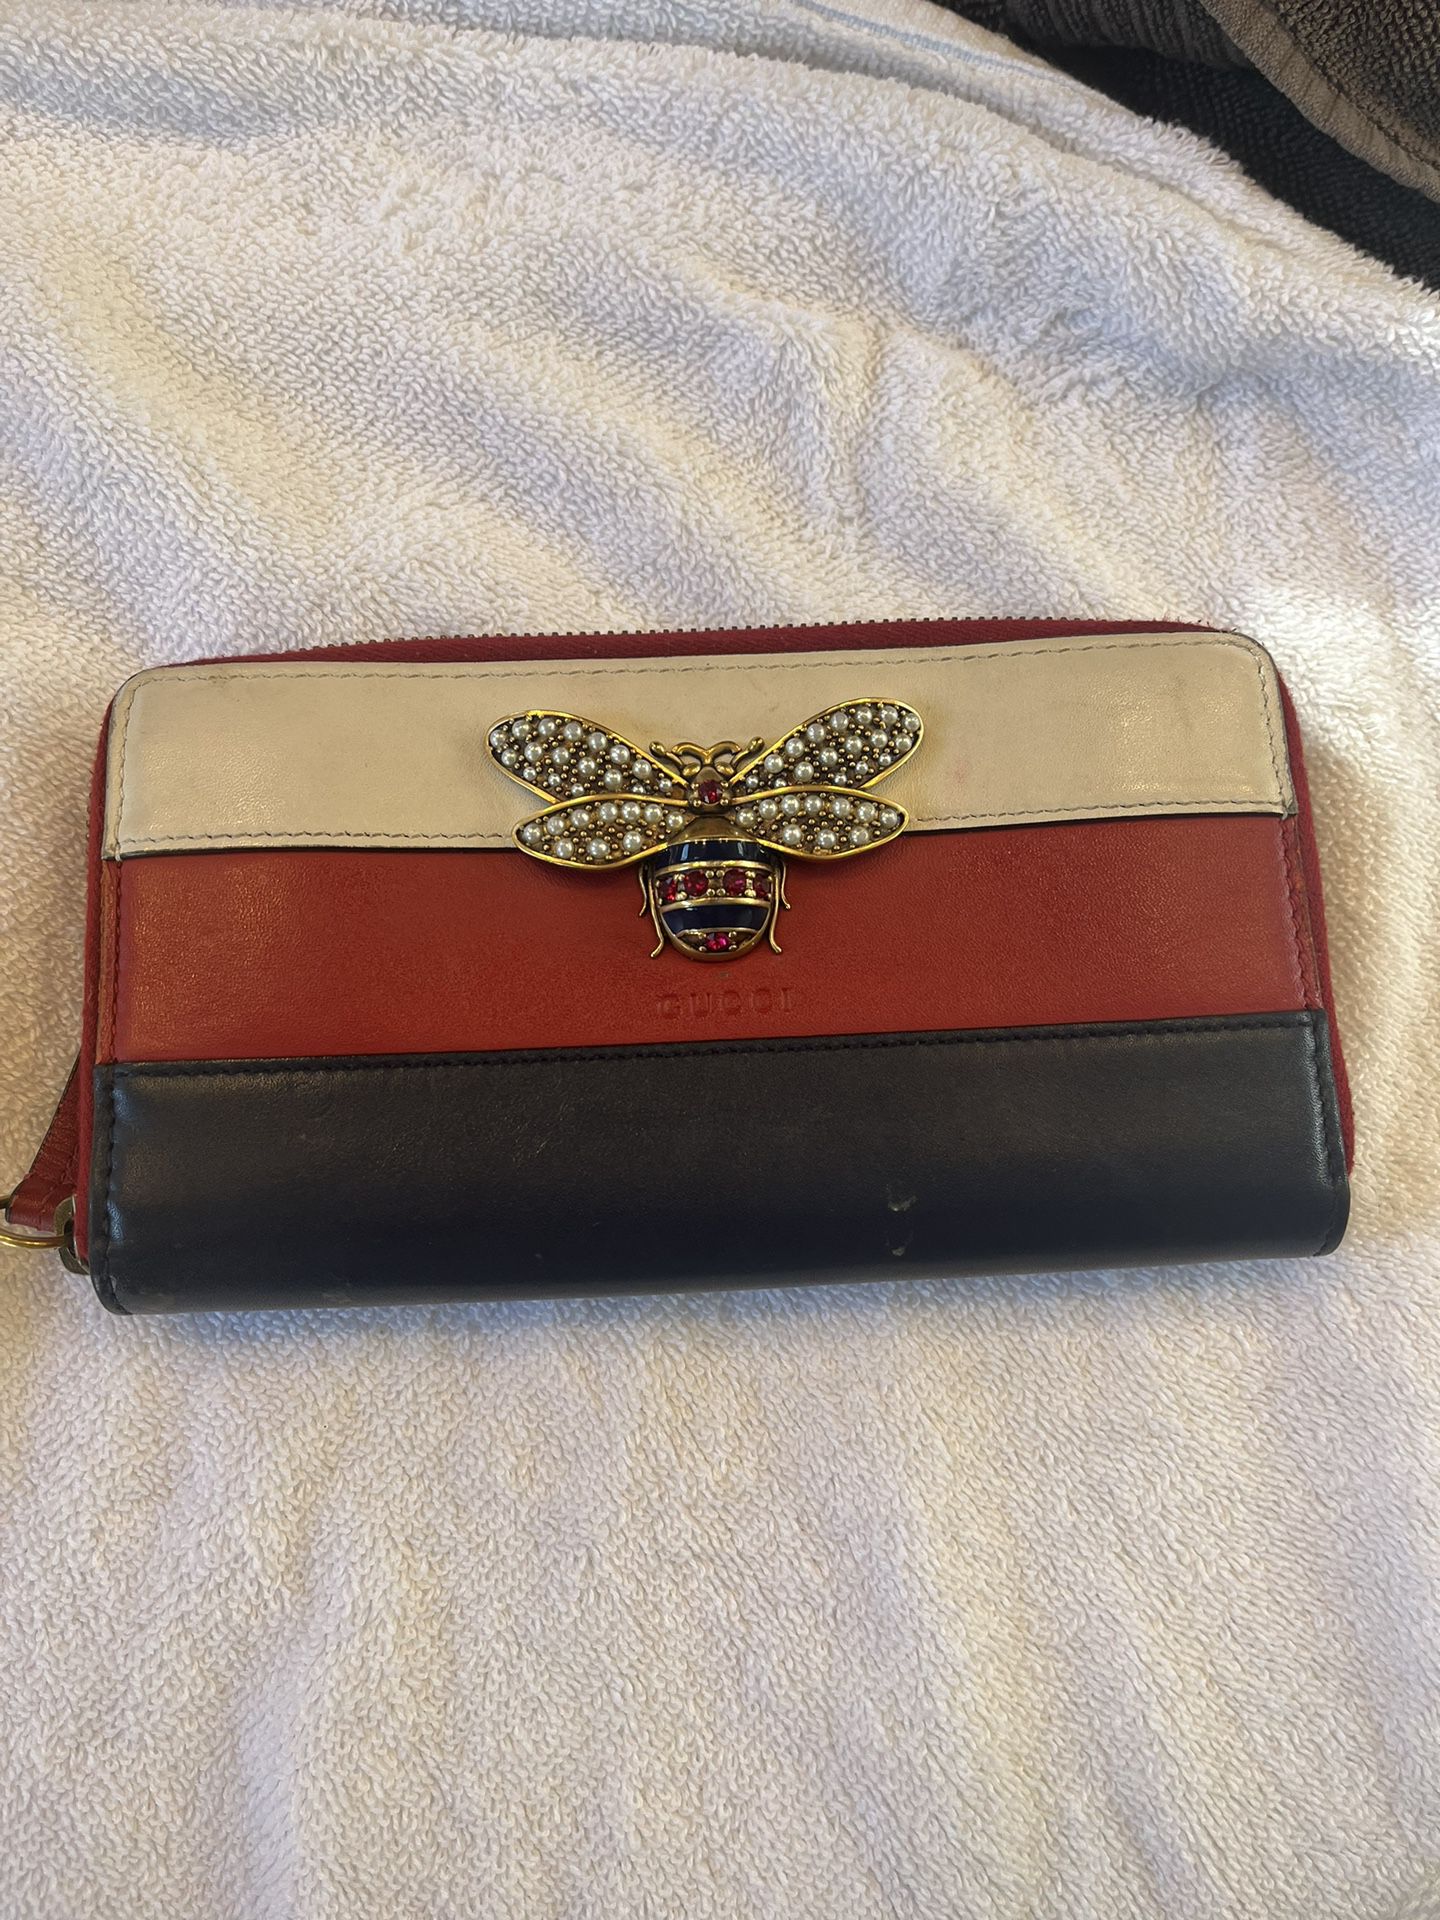 Auth Gucci Wallet